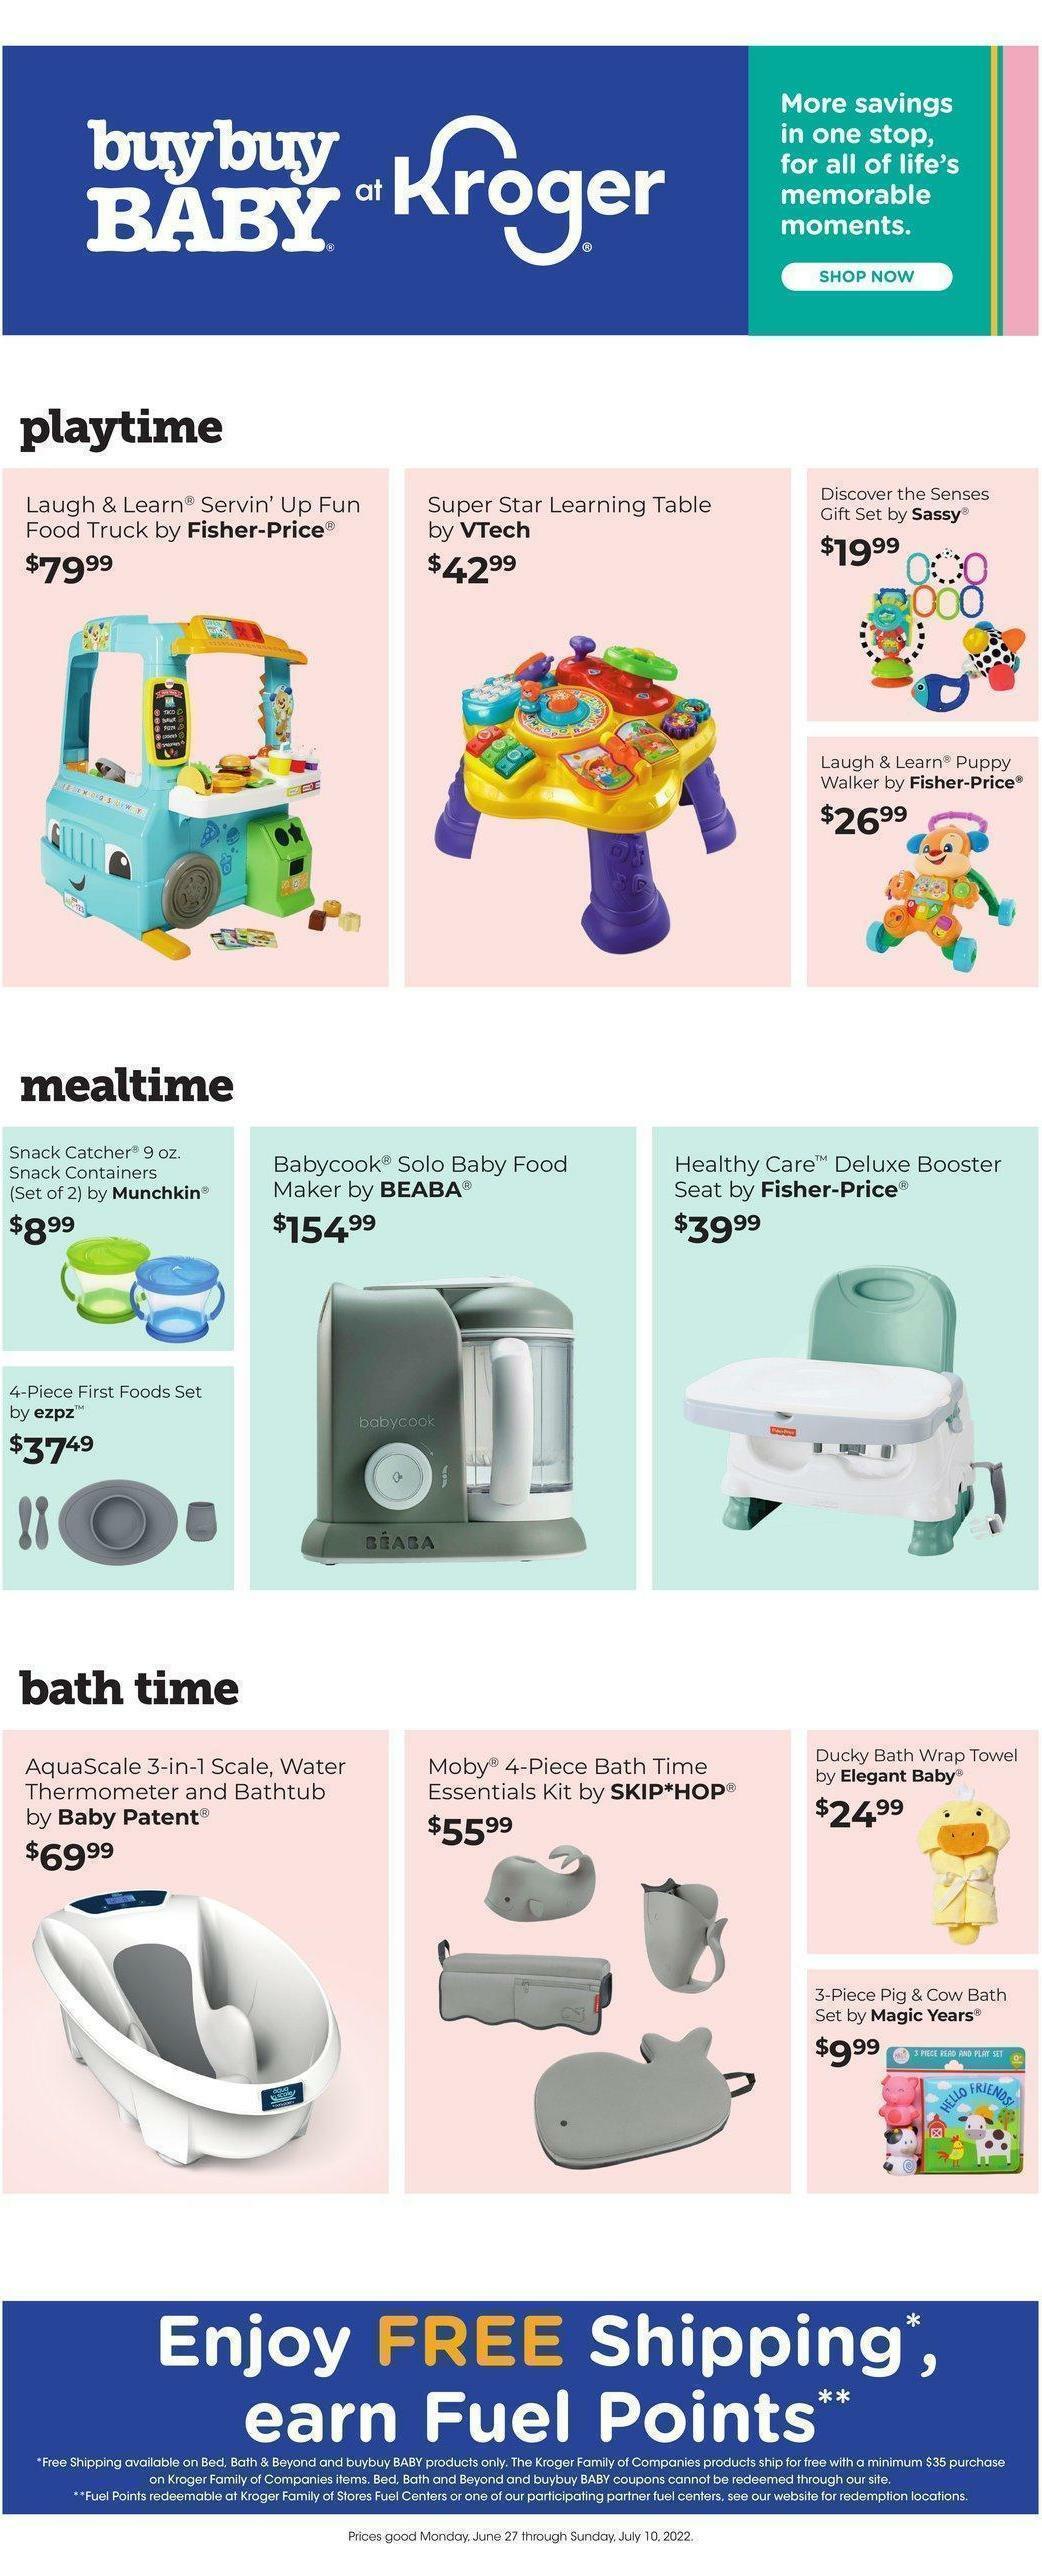 Kroger Bed, Bath & Beyond Weekly Ad from June 27